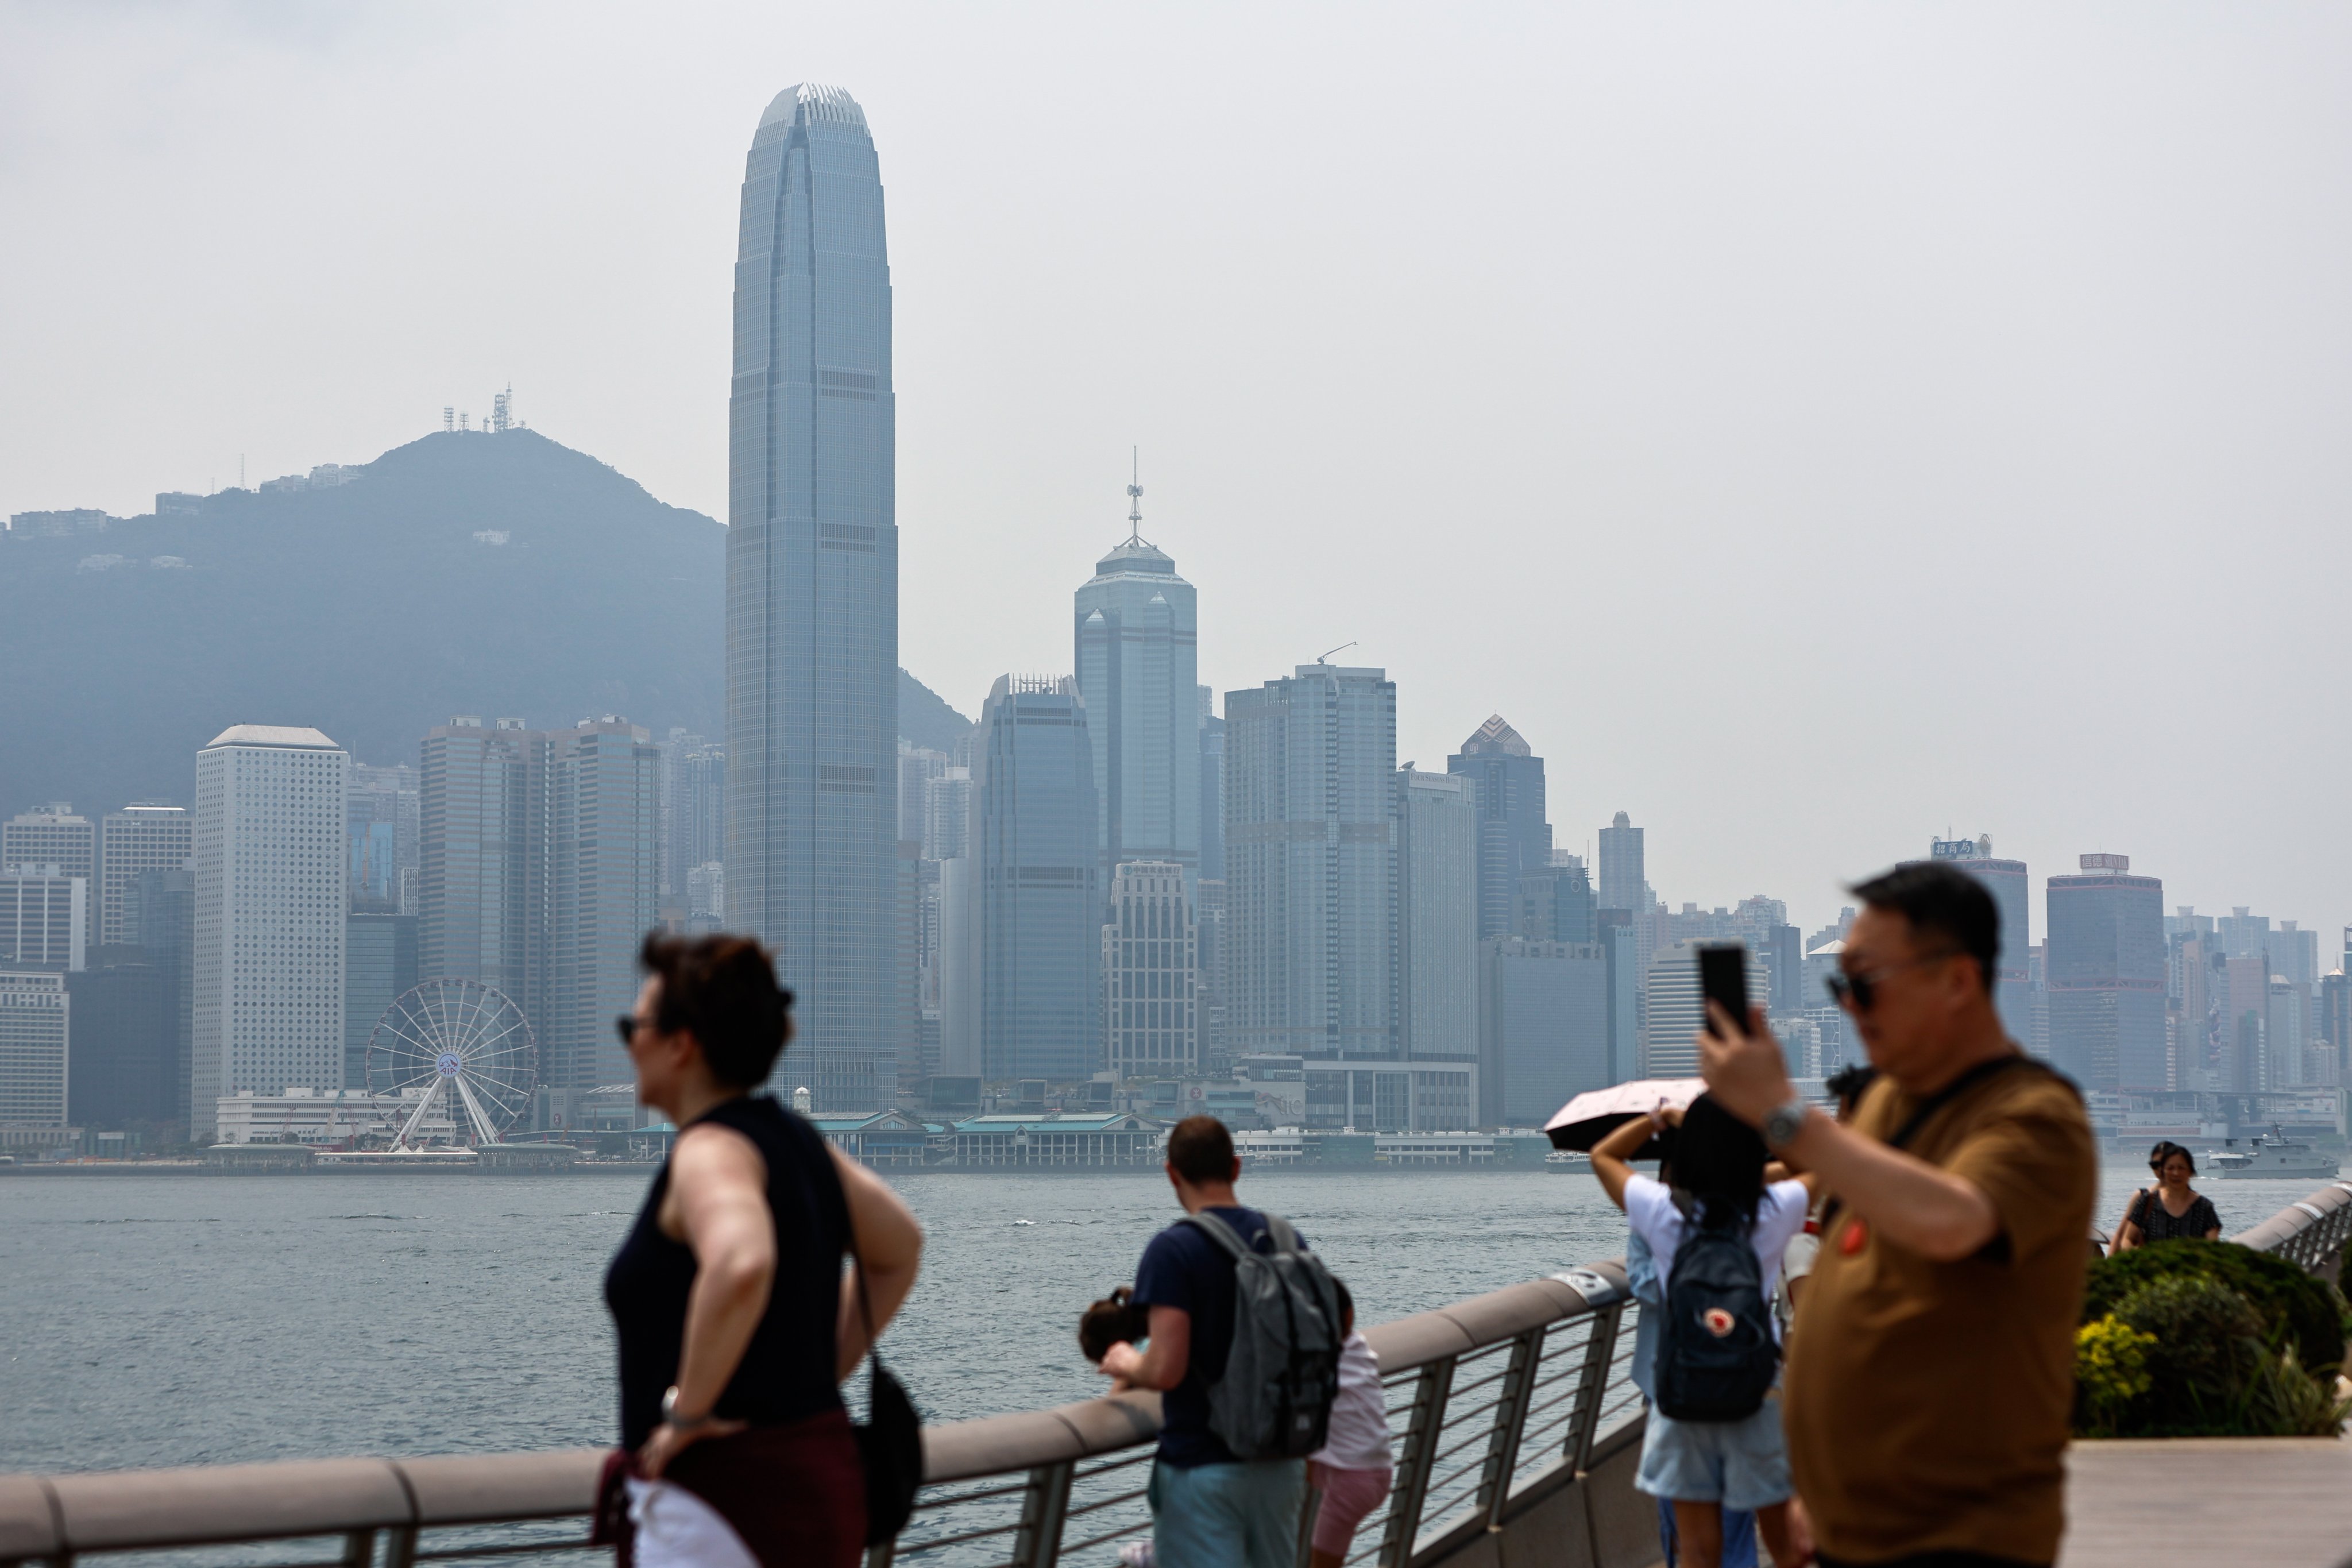 People stand by Victoria Harbour overlooking the central business district in Hong Kong on March 29. Foreign countries, businesses and NGOs have expressed concerns over the city’s Article 23 national security law, adding to the already-negative perception of the city outside China. Photo: EPA-EFE